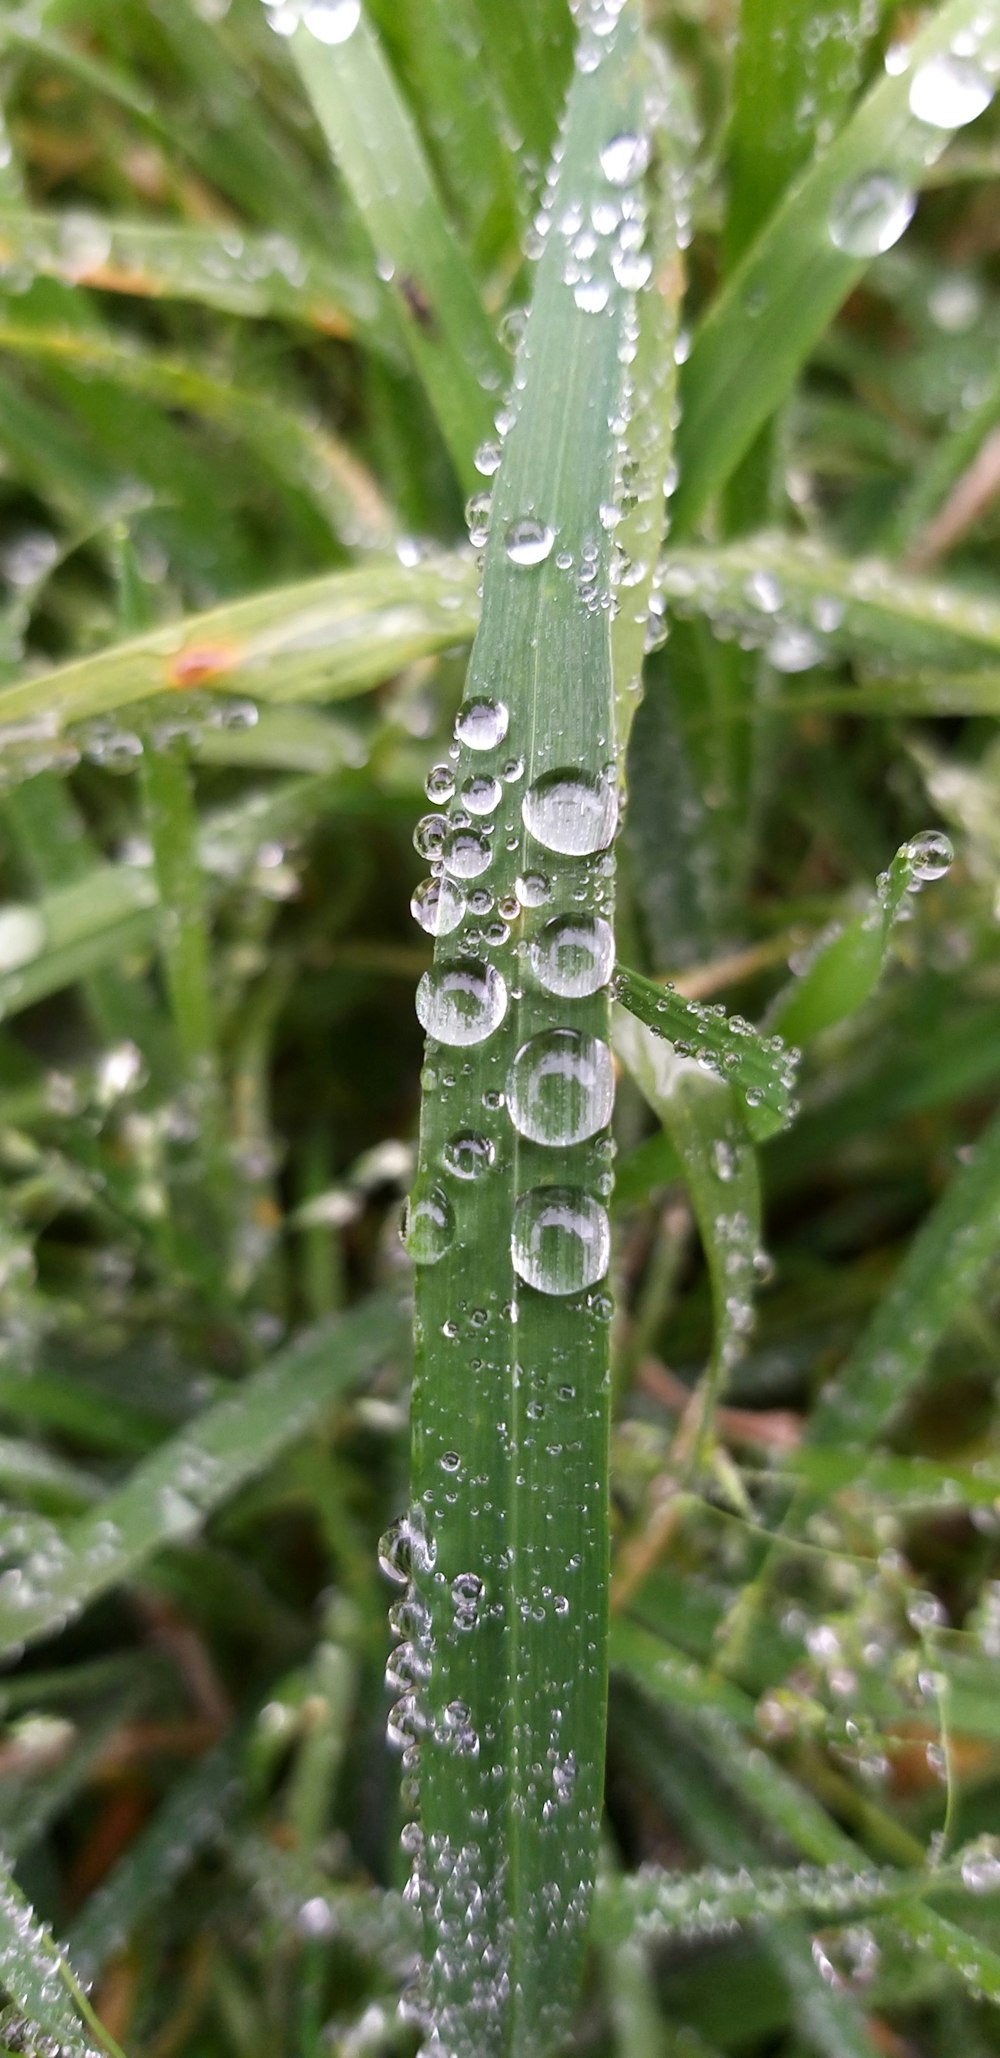 a close up of water droplets on a blade of grass